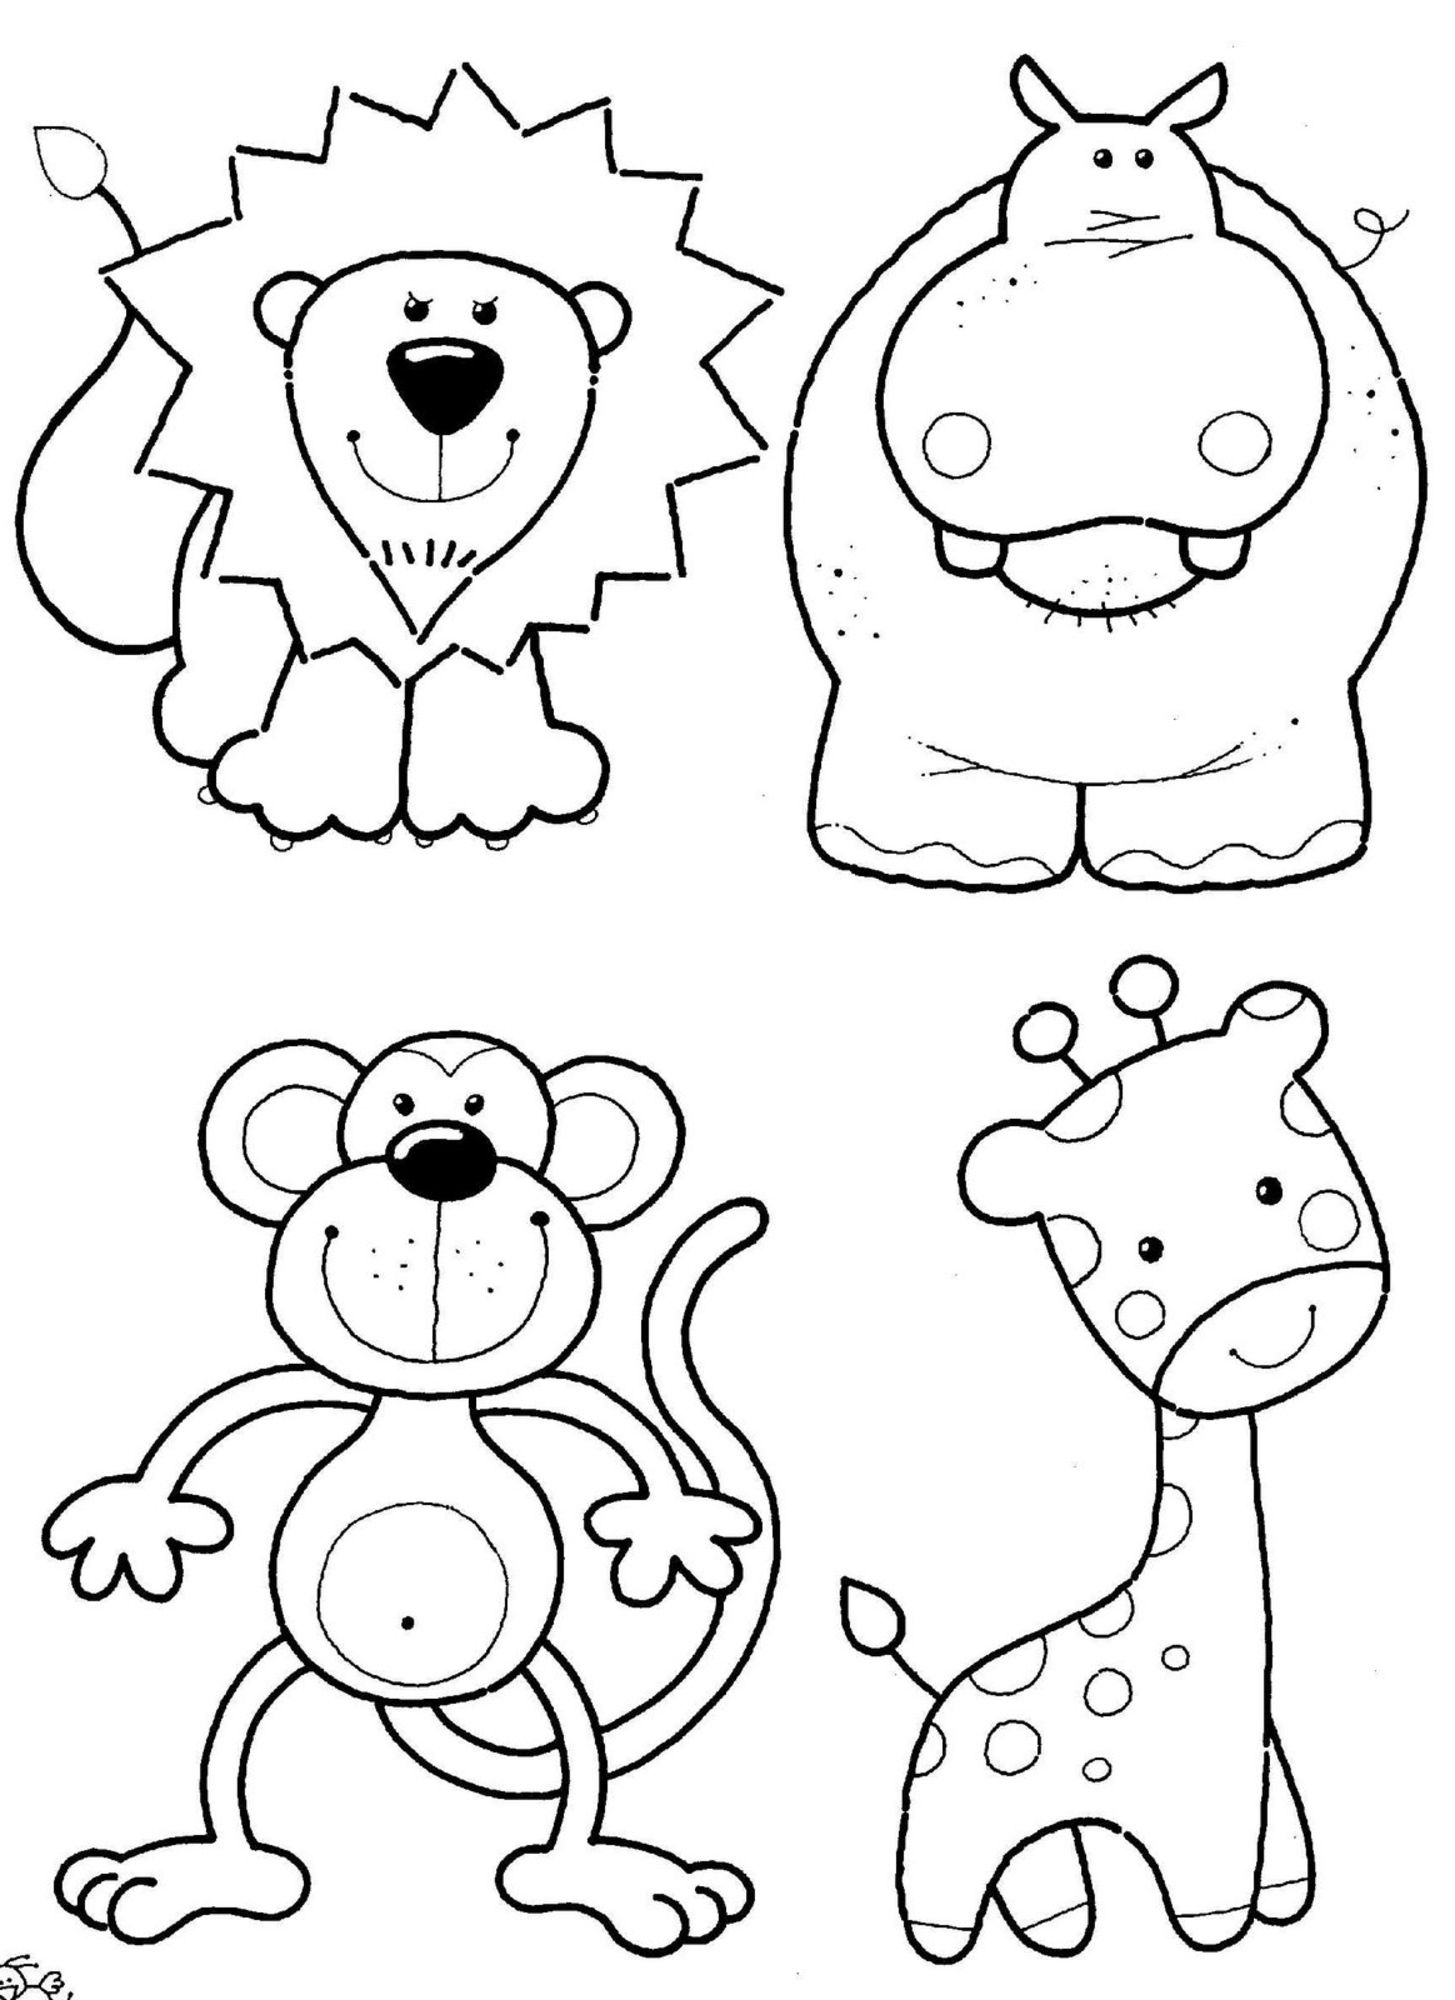 Preschool Zoo | Free Coloring Pages on Masivy World